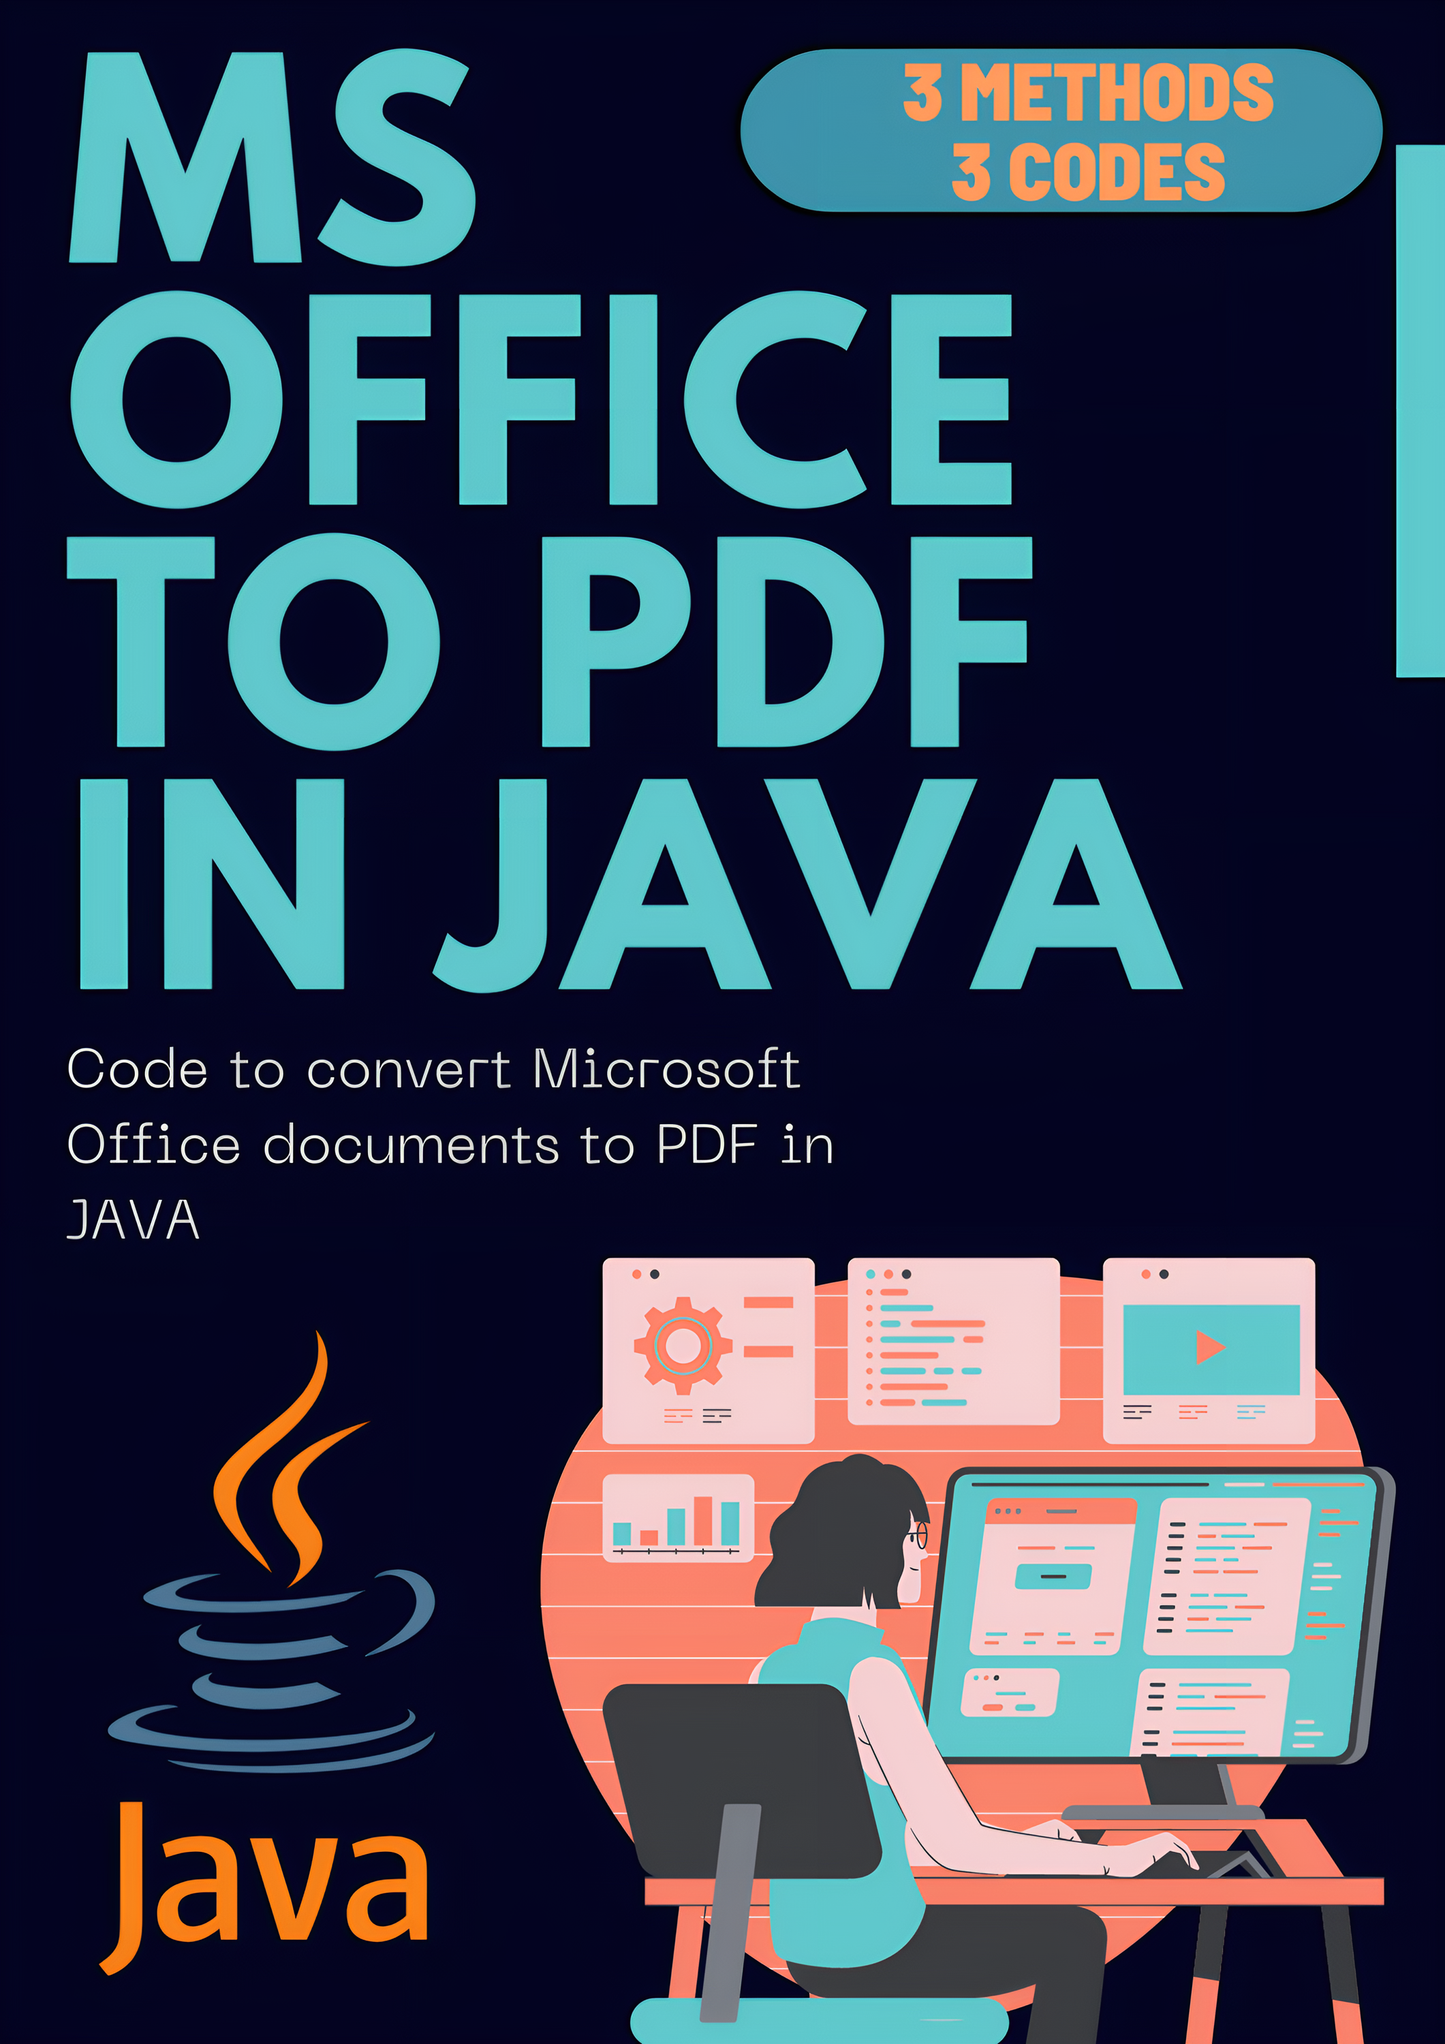 Microsoft Office Word Excel PowerPoint to PDF in Java, Convert Pdf to Word, Java Document Converter, Java PDF Conversion